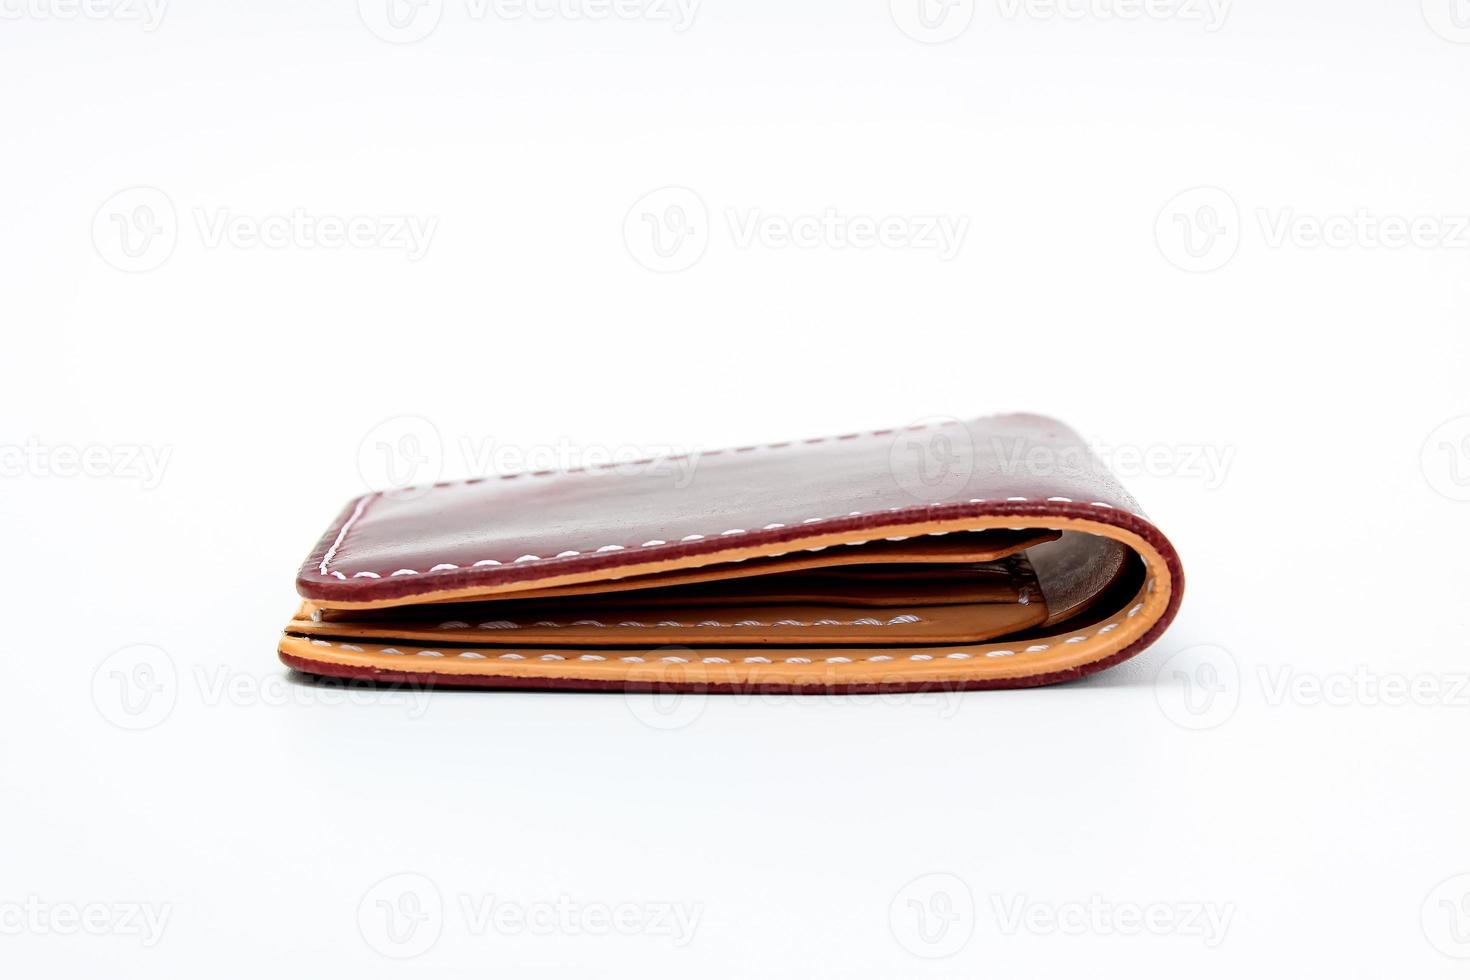 Red or Maroon natural leather wallet photo